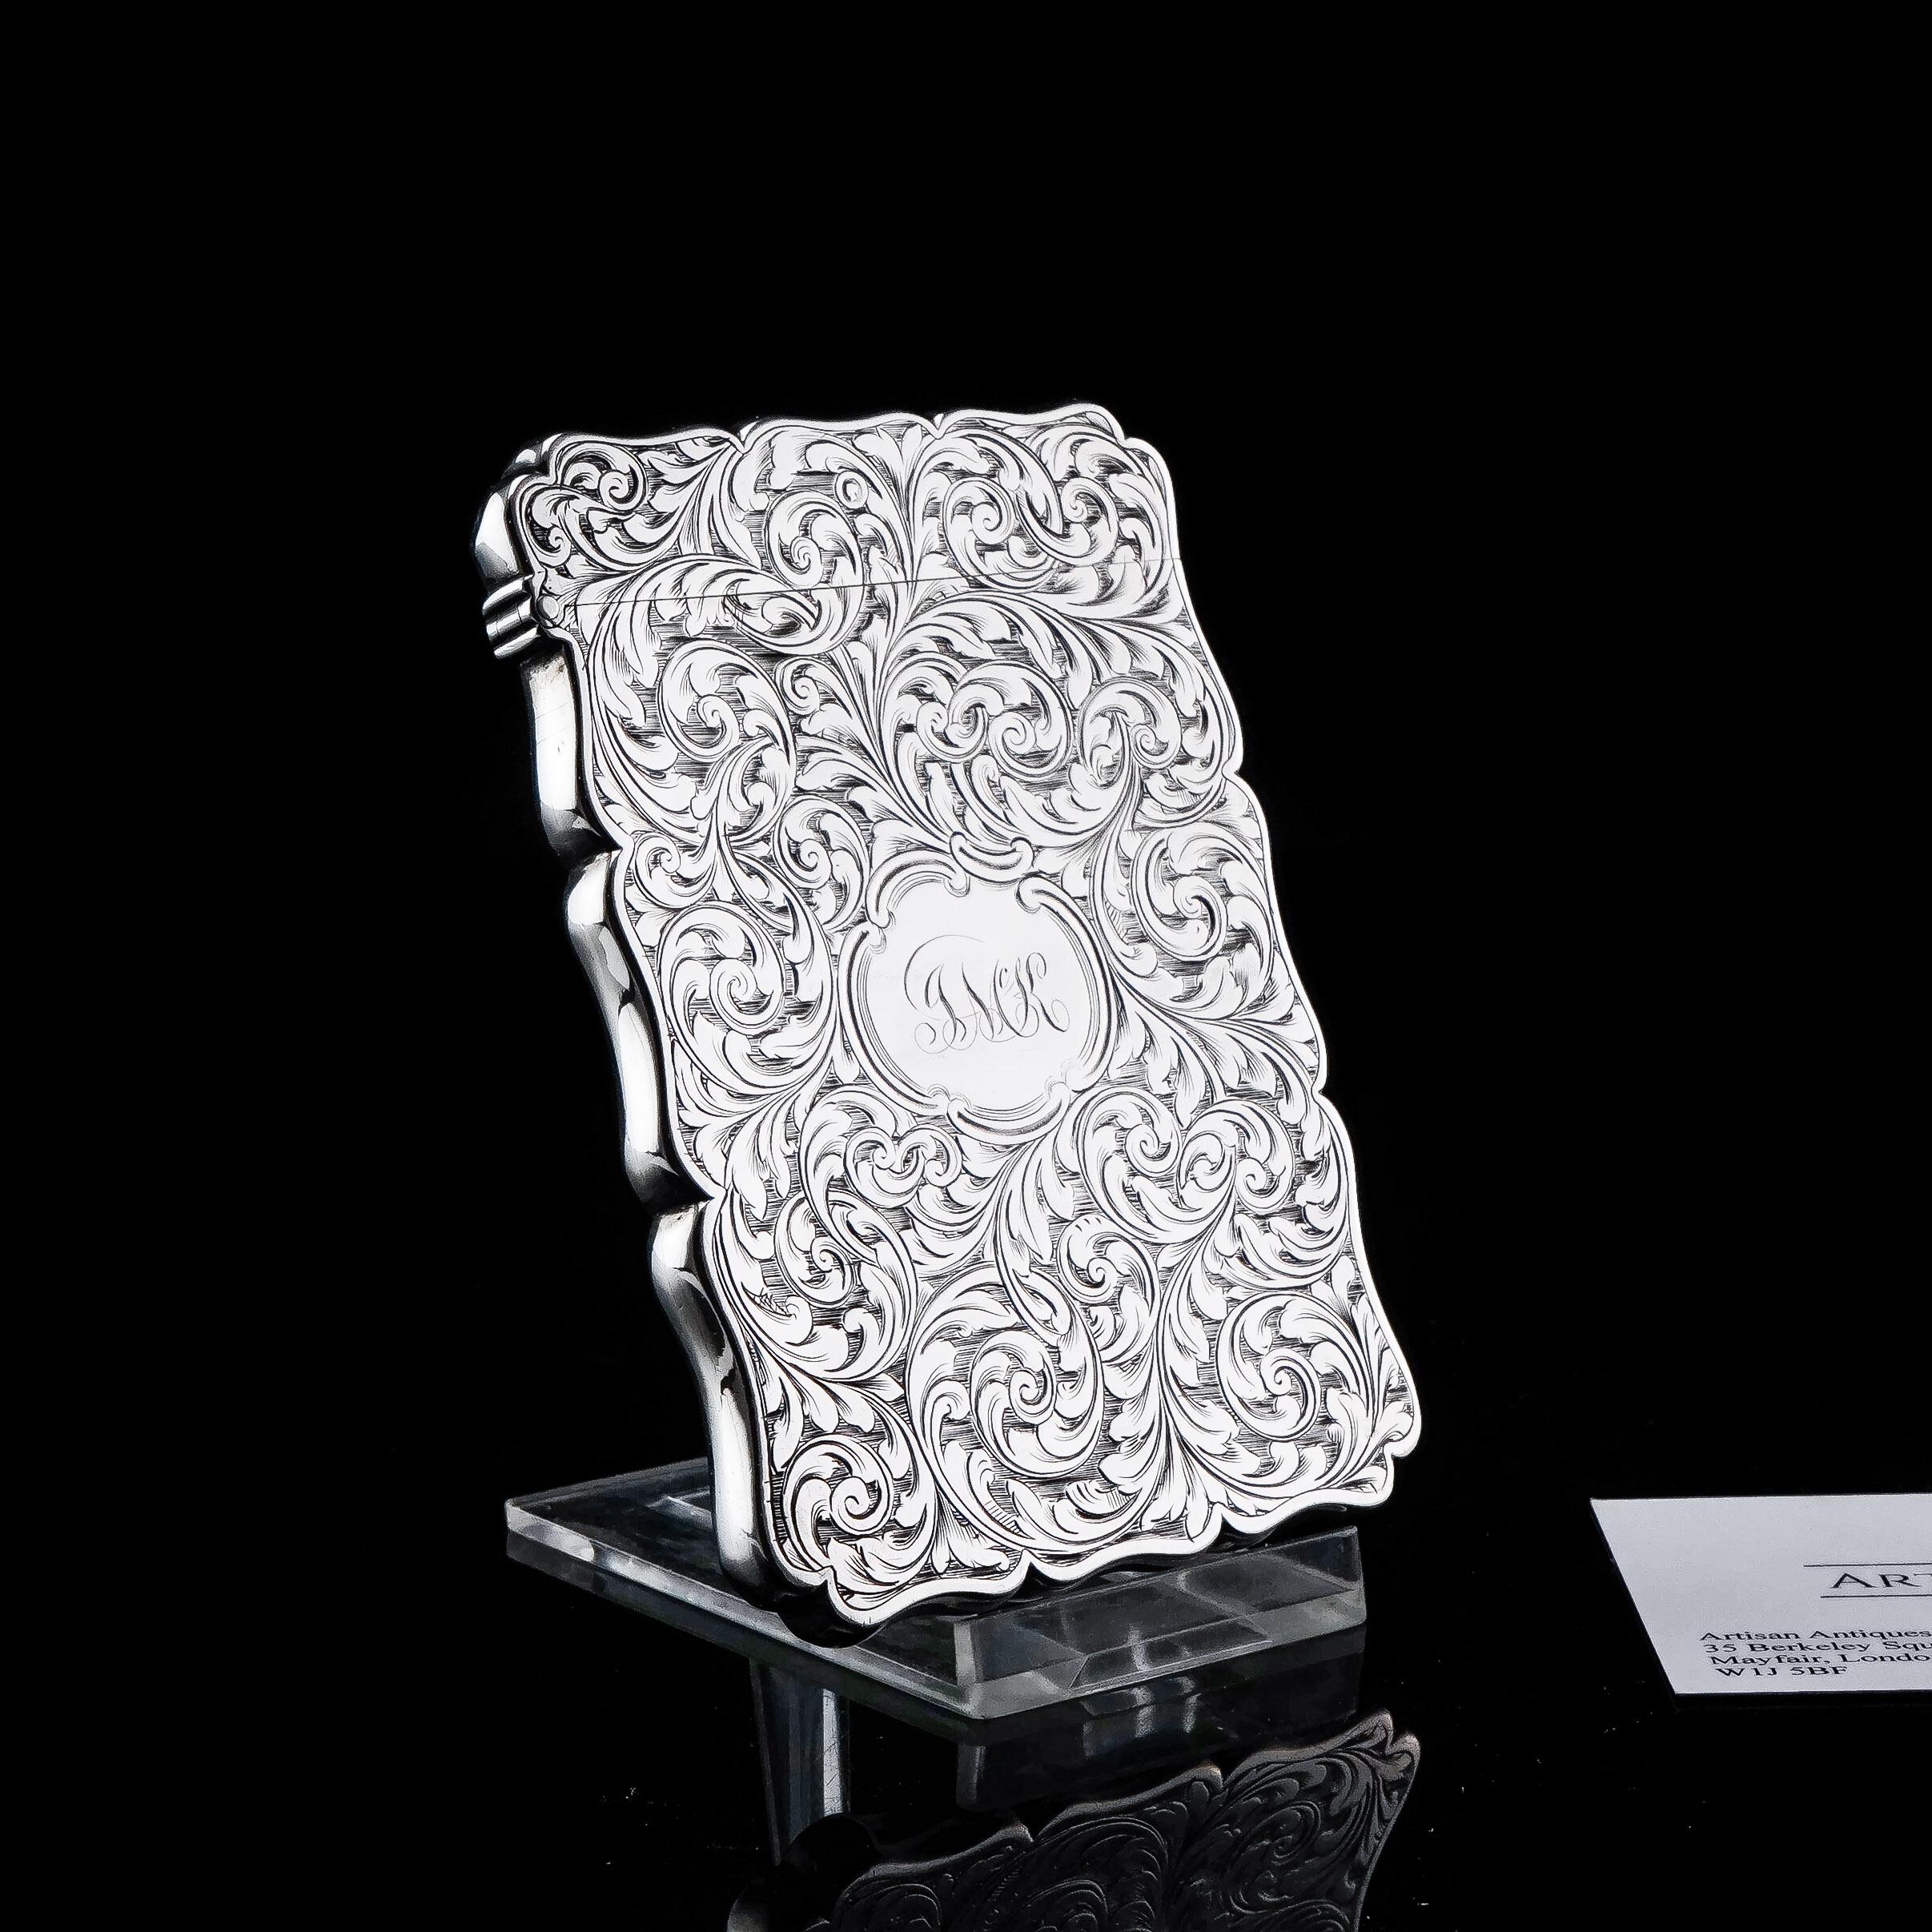 We are delighted to offer this fabulous solid silver card case made by Edward Smith in Birmingham, 1862.
 
This card case is a fine example of fine Victorian craftsmanship and hand engraving. The case has been fully embellished on the exterior with